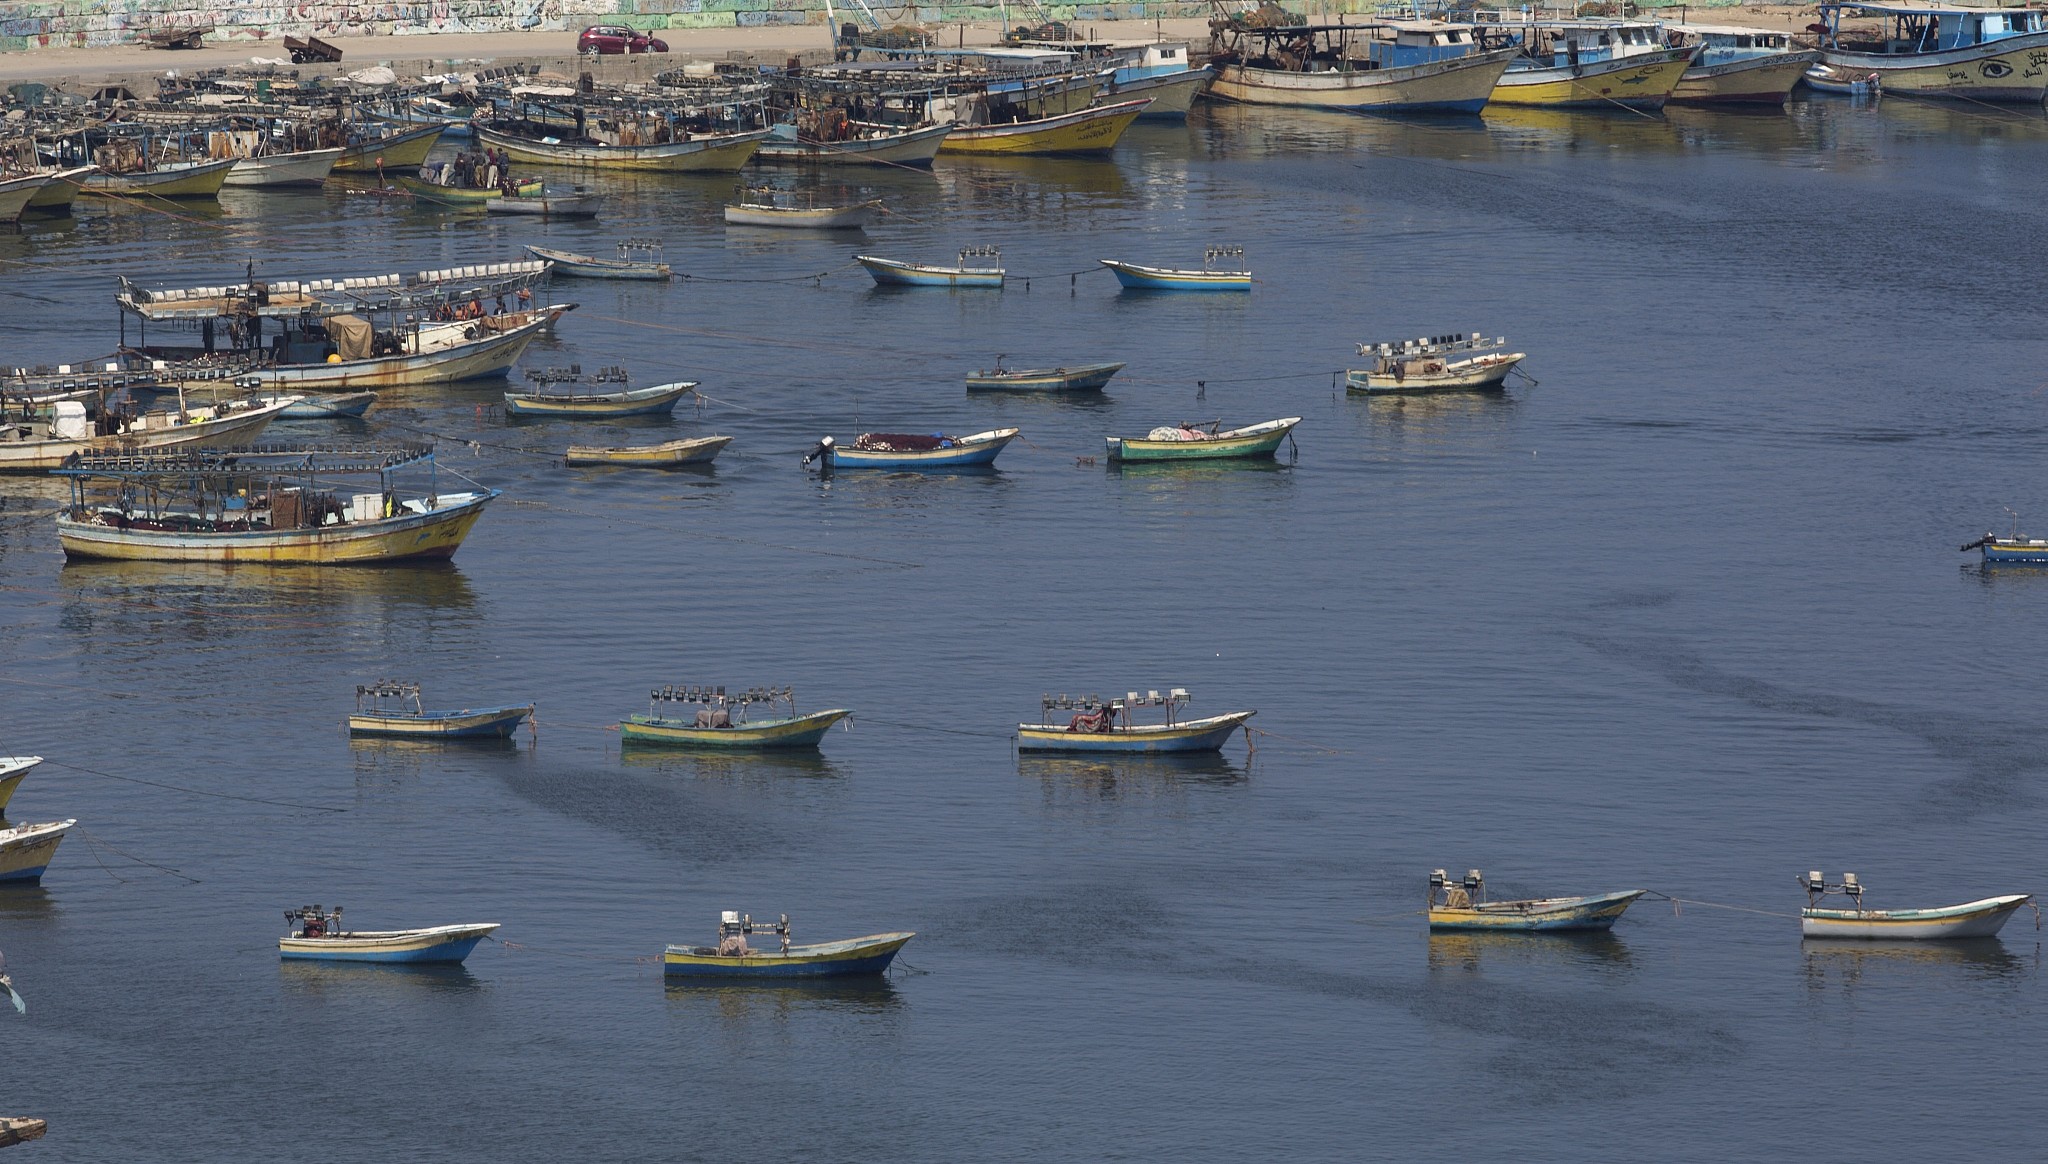 Israeli warplanes have targeted Palestinian fishing boats off the coast of Gaza, according to reports.